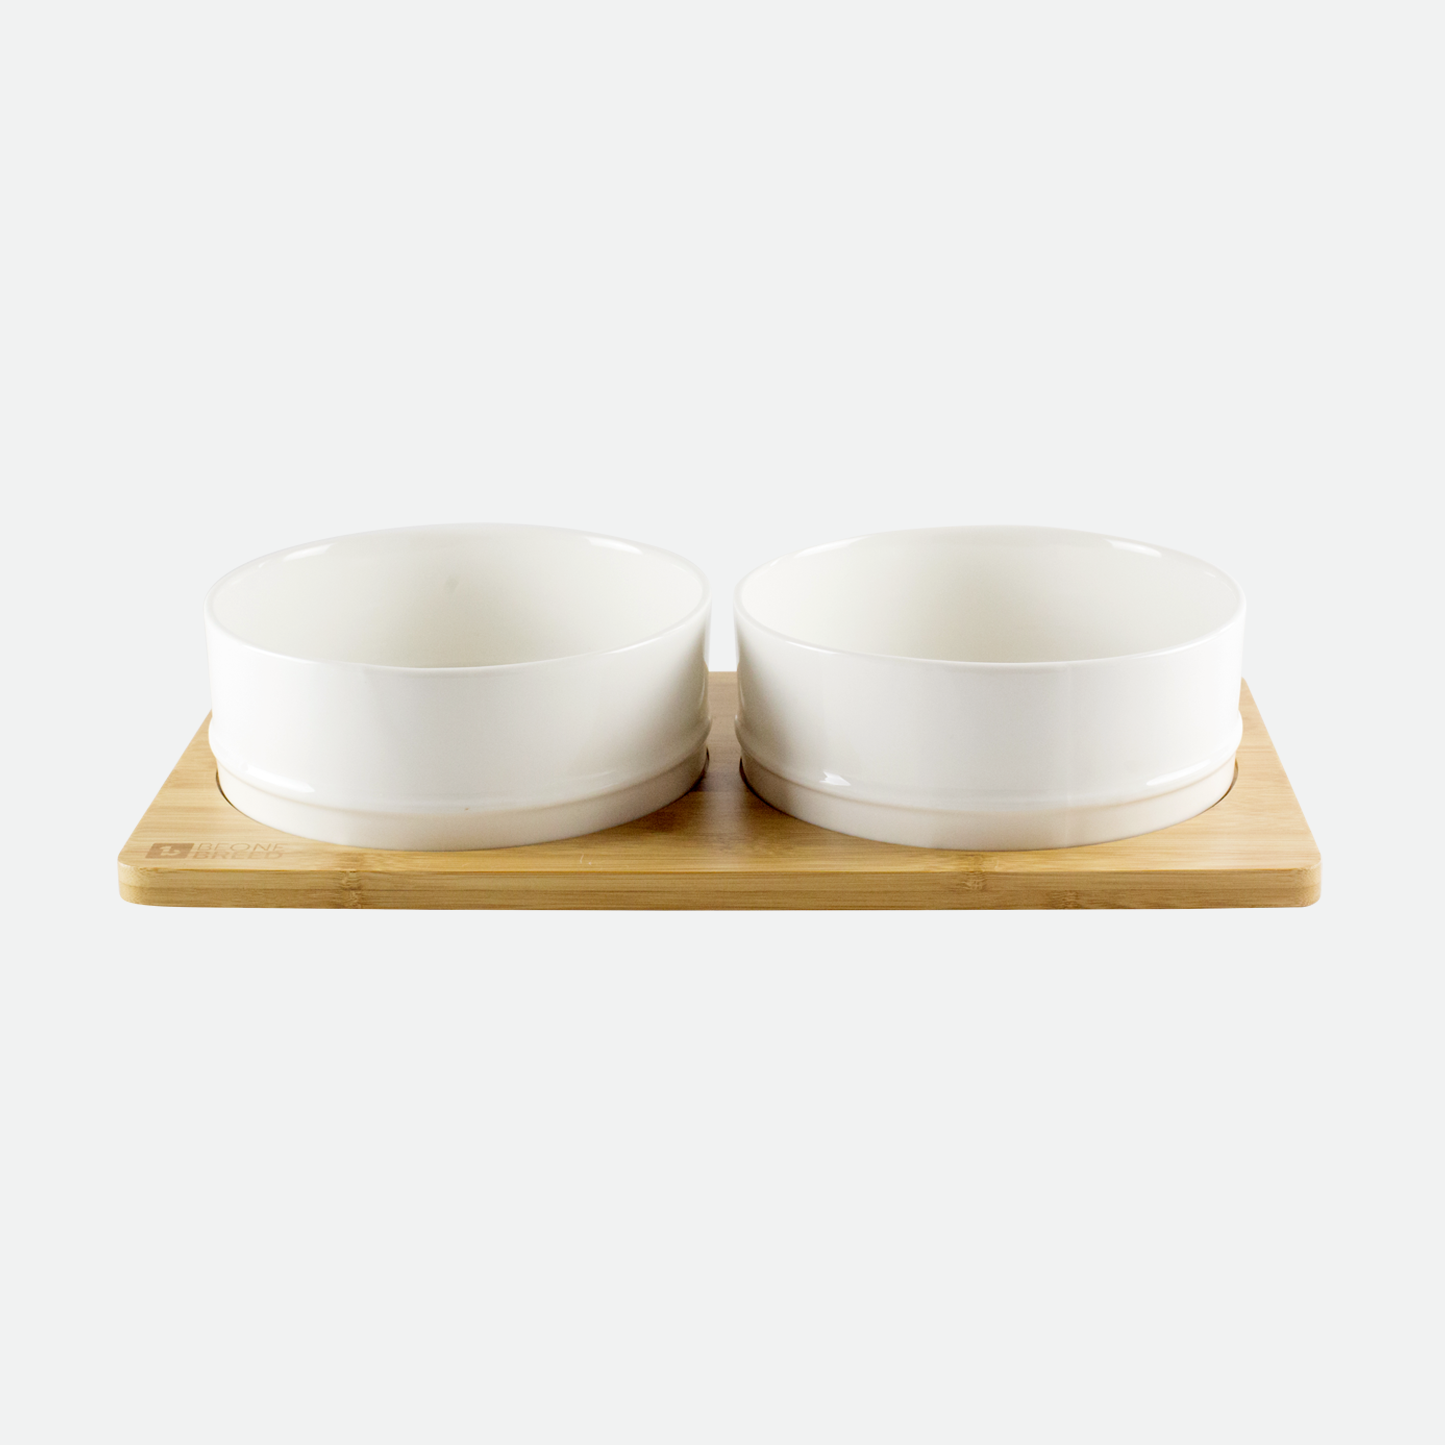 Ceramic bowls on bamboo plate for pet, white